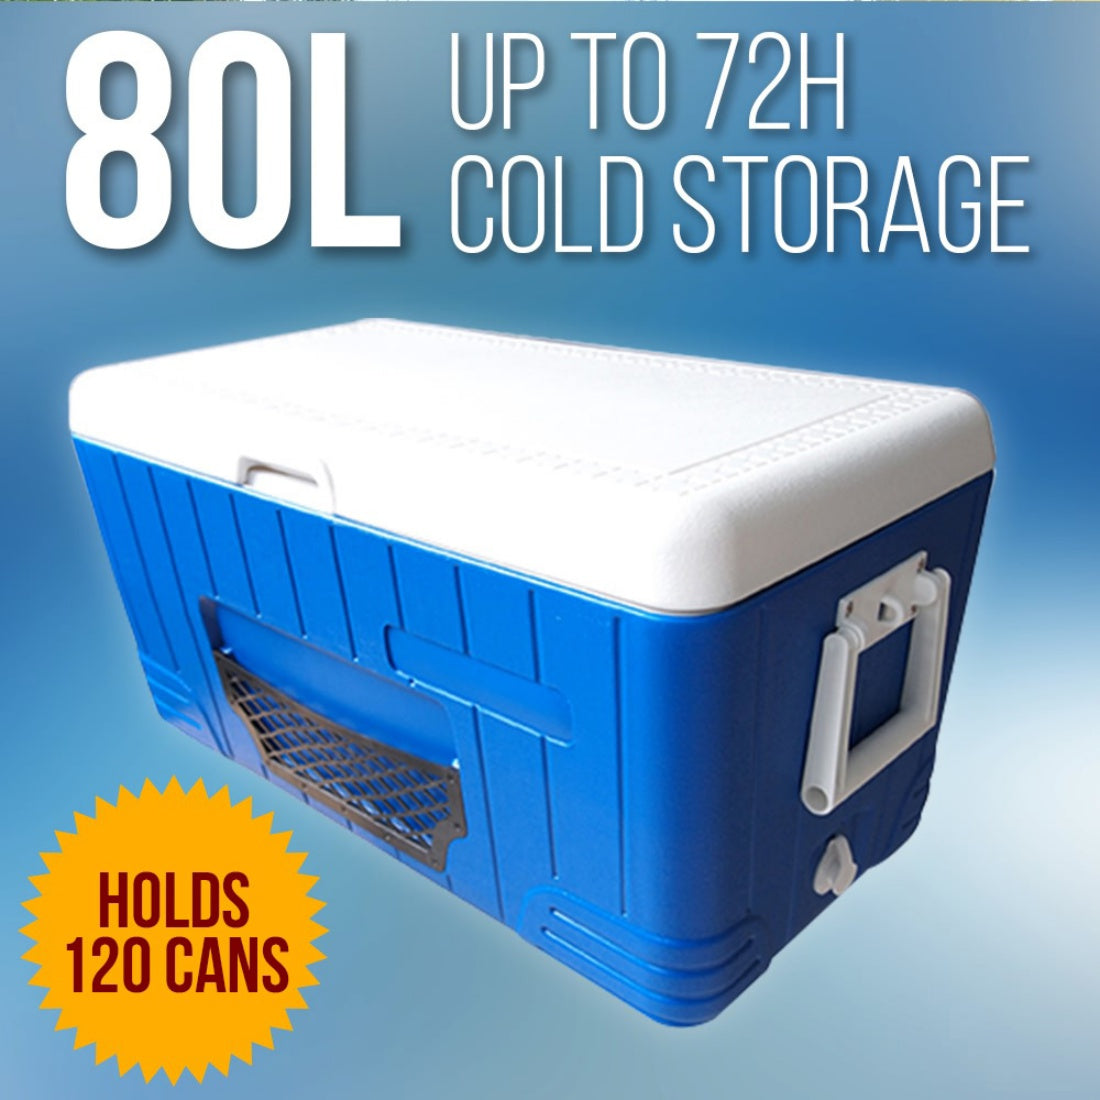 80L Litre Cooler Insulated Ice Box Cold Esky Beach Party Camping Fishing Picnic